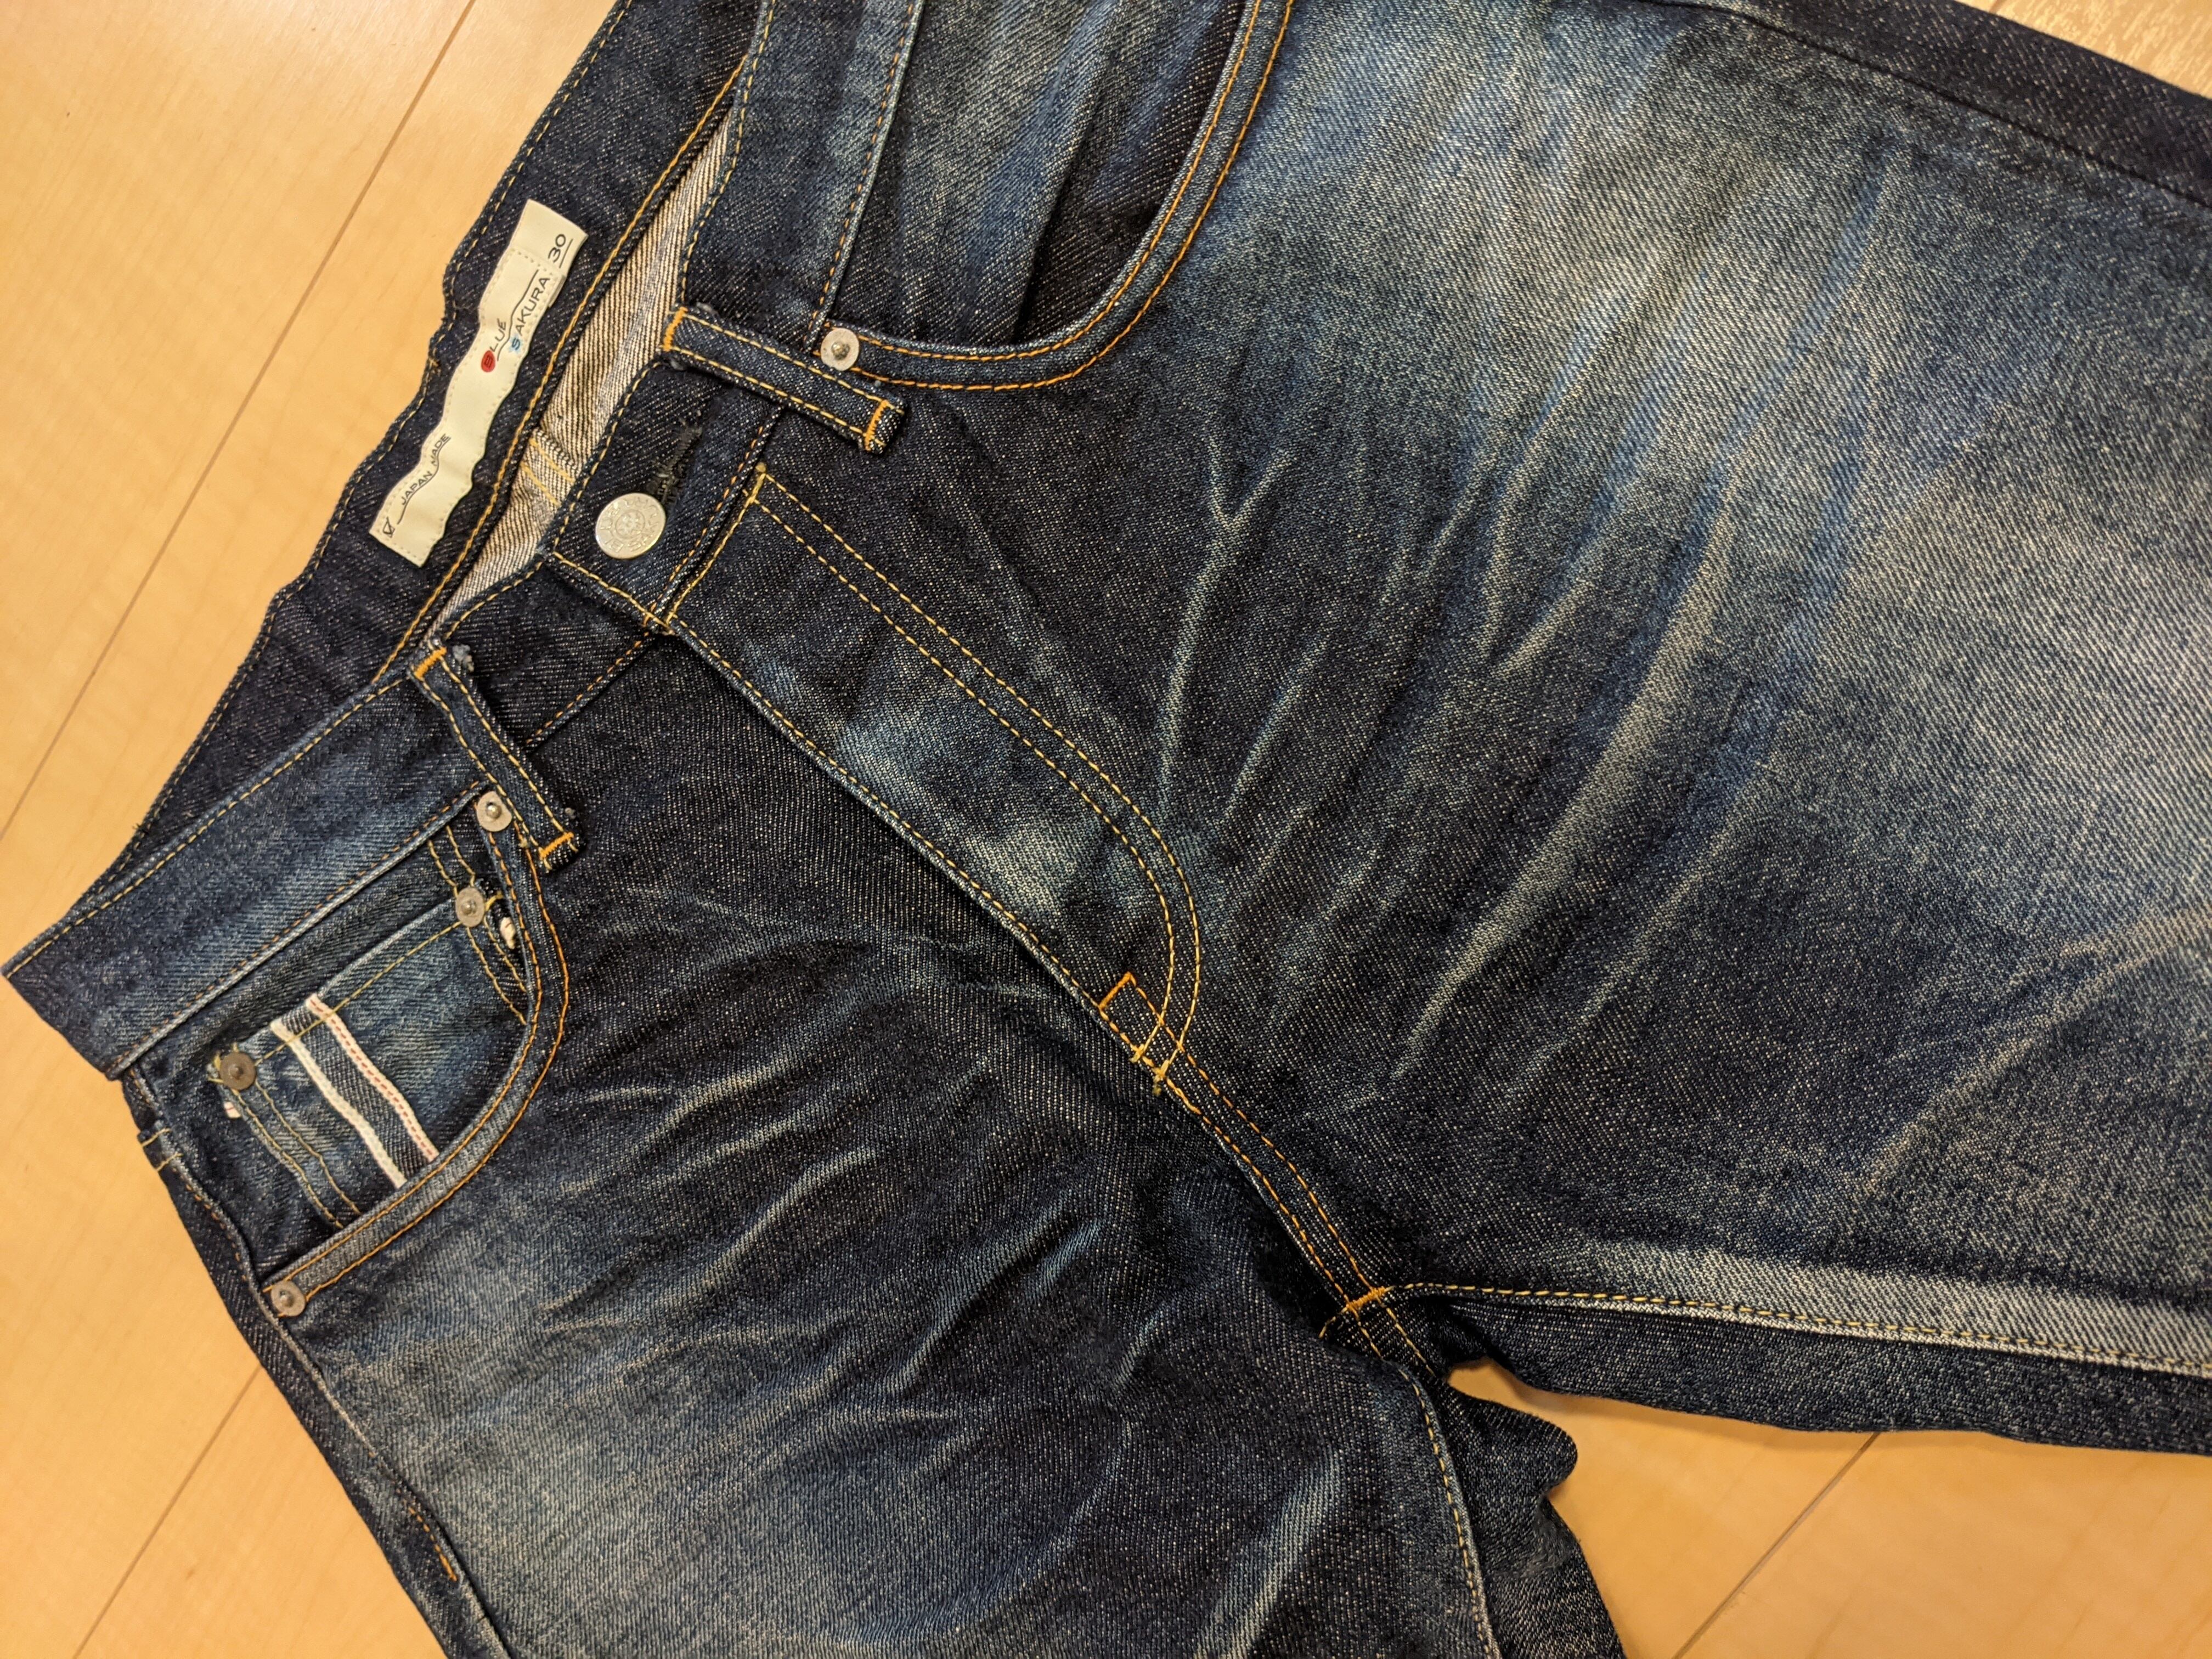 BLUE SAKURA Jeans 30inch 15oz Selvedge Jeans Used only once ブルー